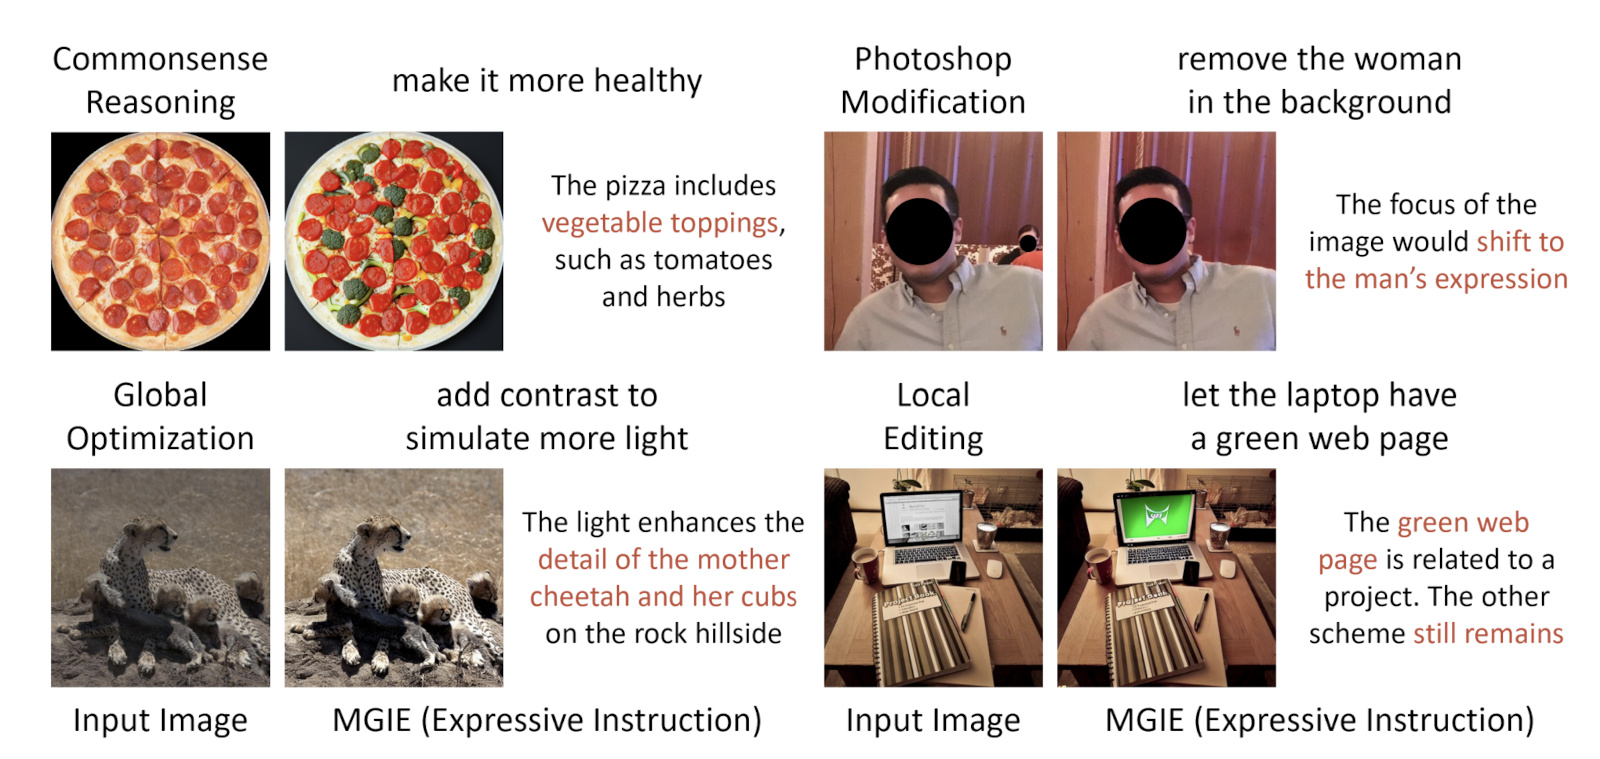 Apple unveiled an AI model for editing images based on text commands-2